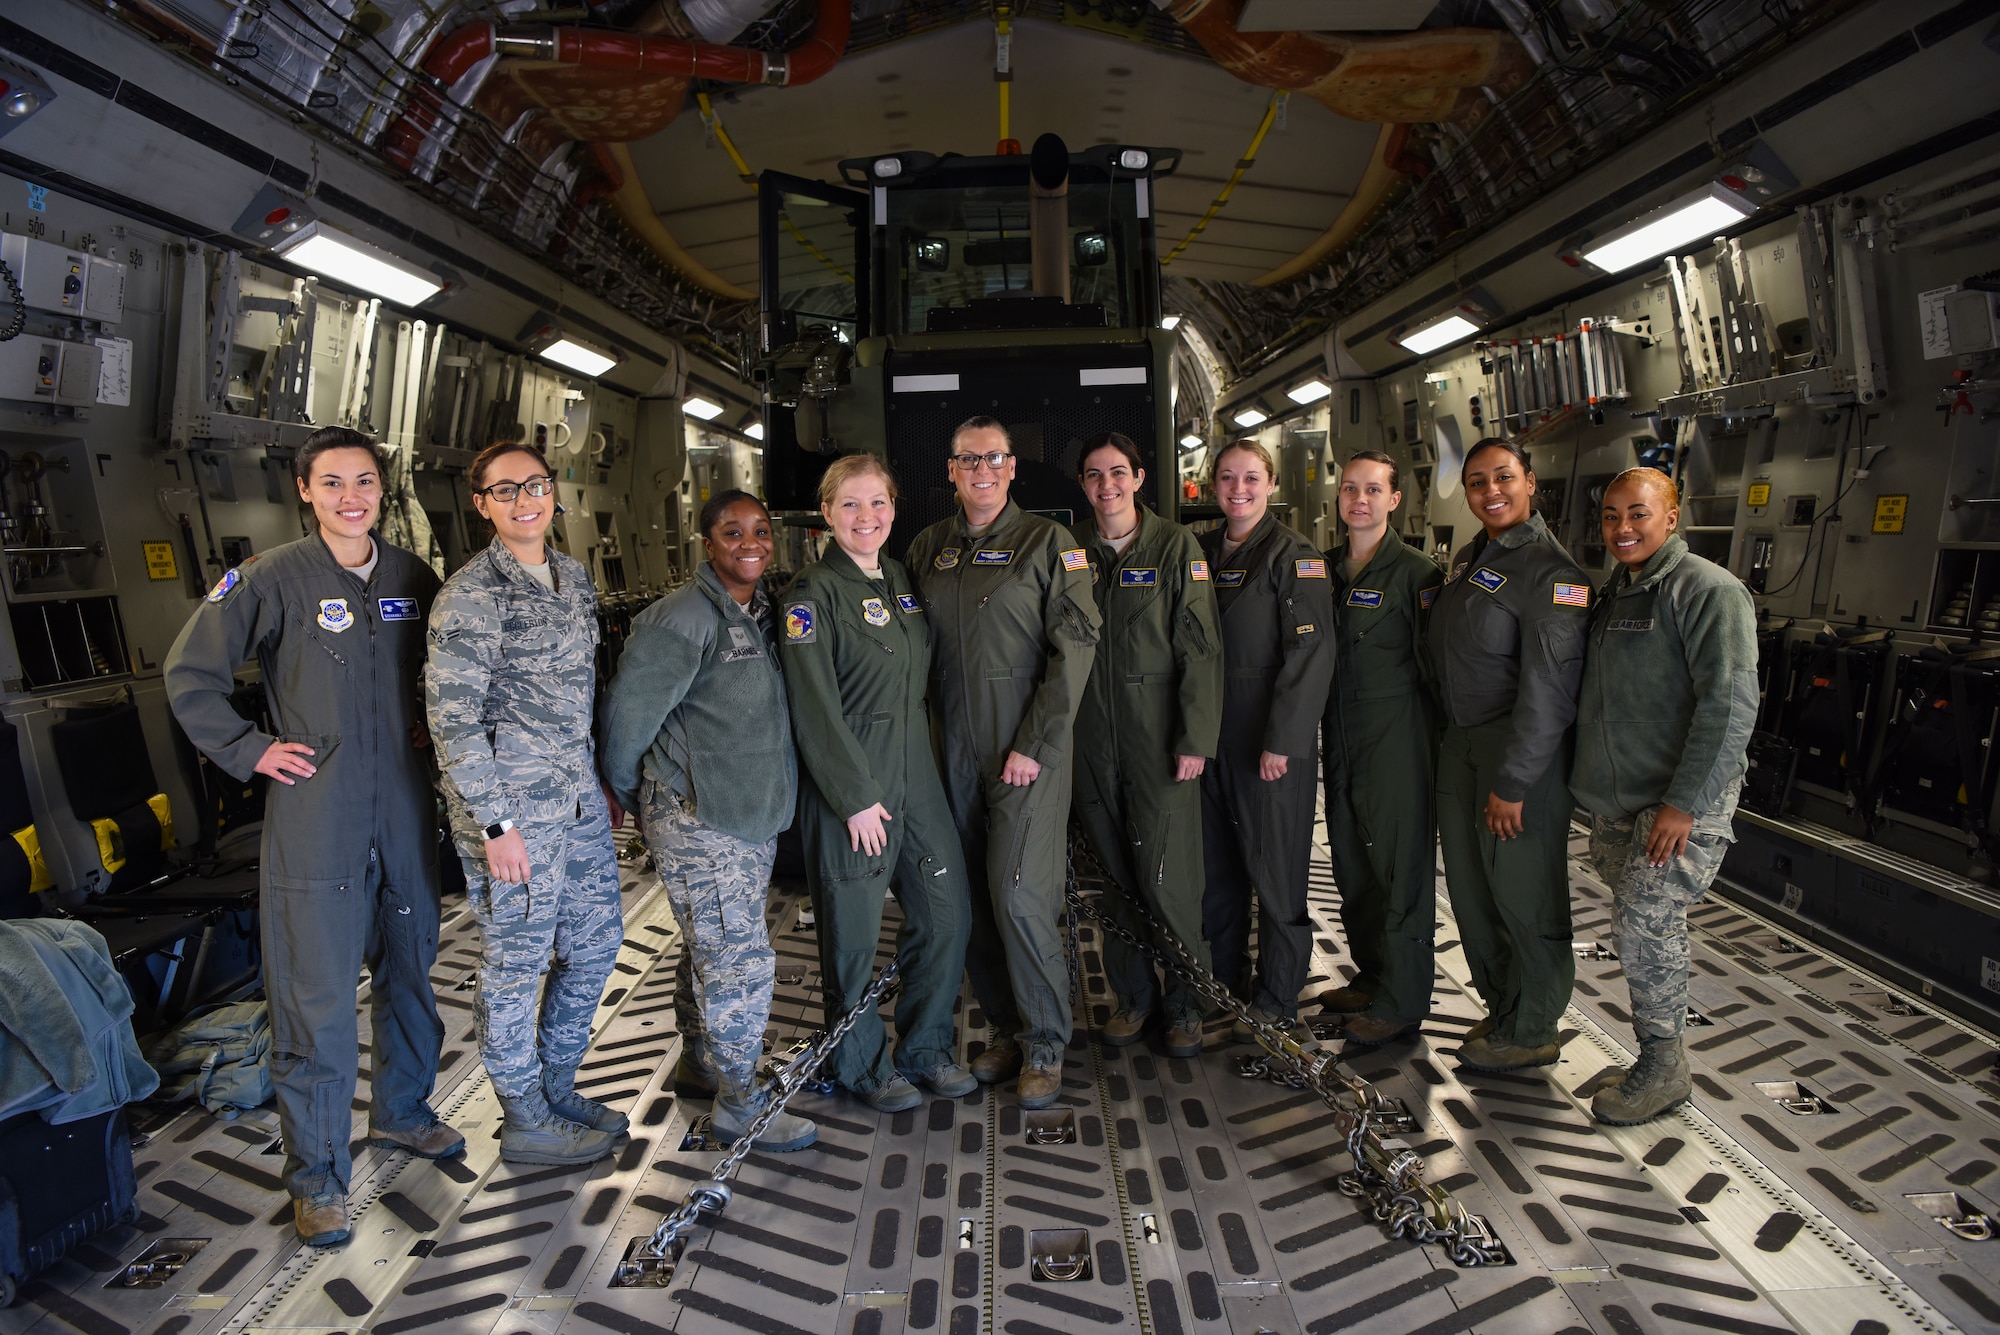 From the left, Maj. Giovanna Espegio, Airman 1st Class Rebeckah Eggleston, Senior Airman Jasmene Barnes, Capt. Taylor Stephens, Senior Master Sgt. Lori Tascione, Staff Sgt. Cassandra LaVoie, 1st Lt. Hannah Wiesneski, Senior Airmen Daneile Belovarac, Airman 1st Class Casey McCune and Senior Airman Taylar Moe stand on the cargo deck of a C-17 Globemaster III March 5, 2018, at Dover Air Force Base, Del. The all-female crew flew a local mission in honor of Women’s History Month and Tascione’s retirement. (U.S. Air Force Photo by Airman 1st Class Zoe M. Wockenfuss)